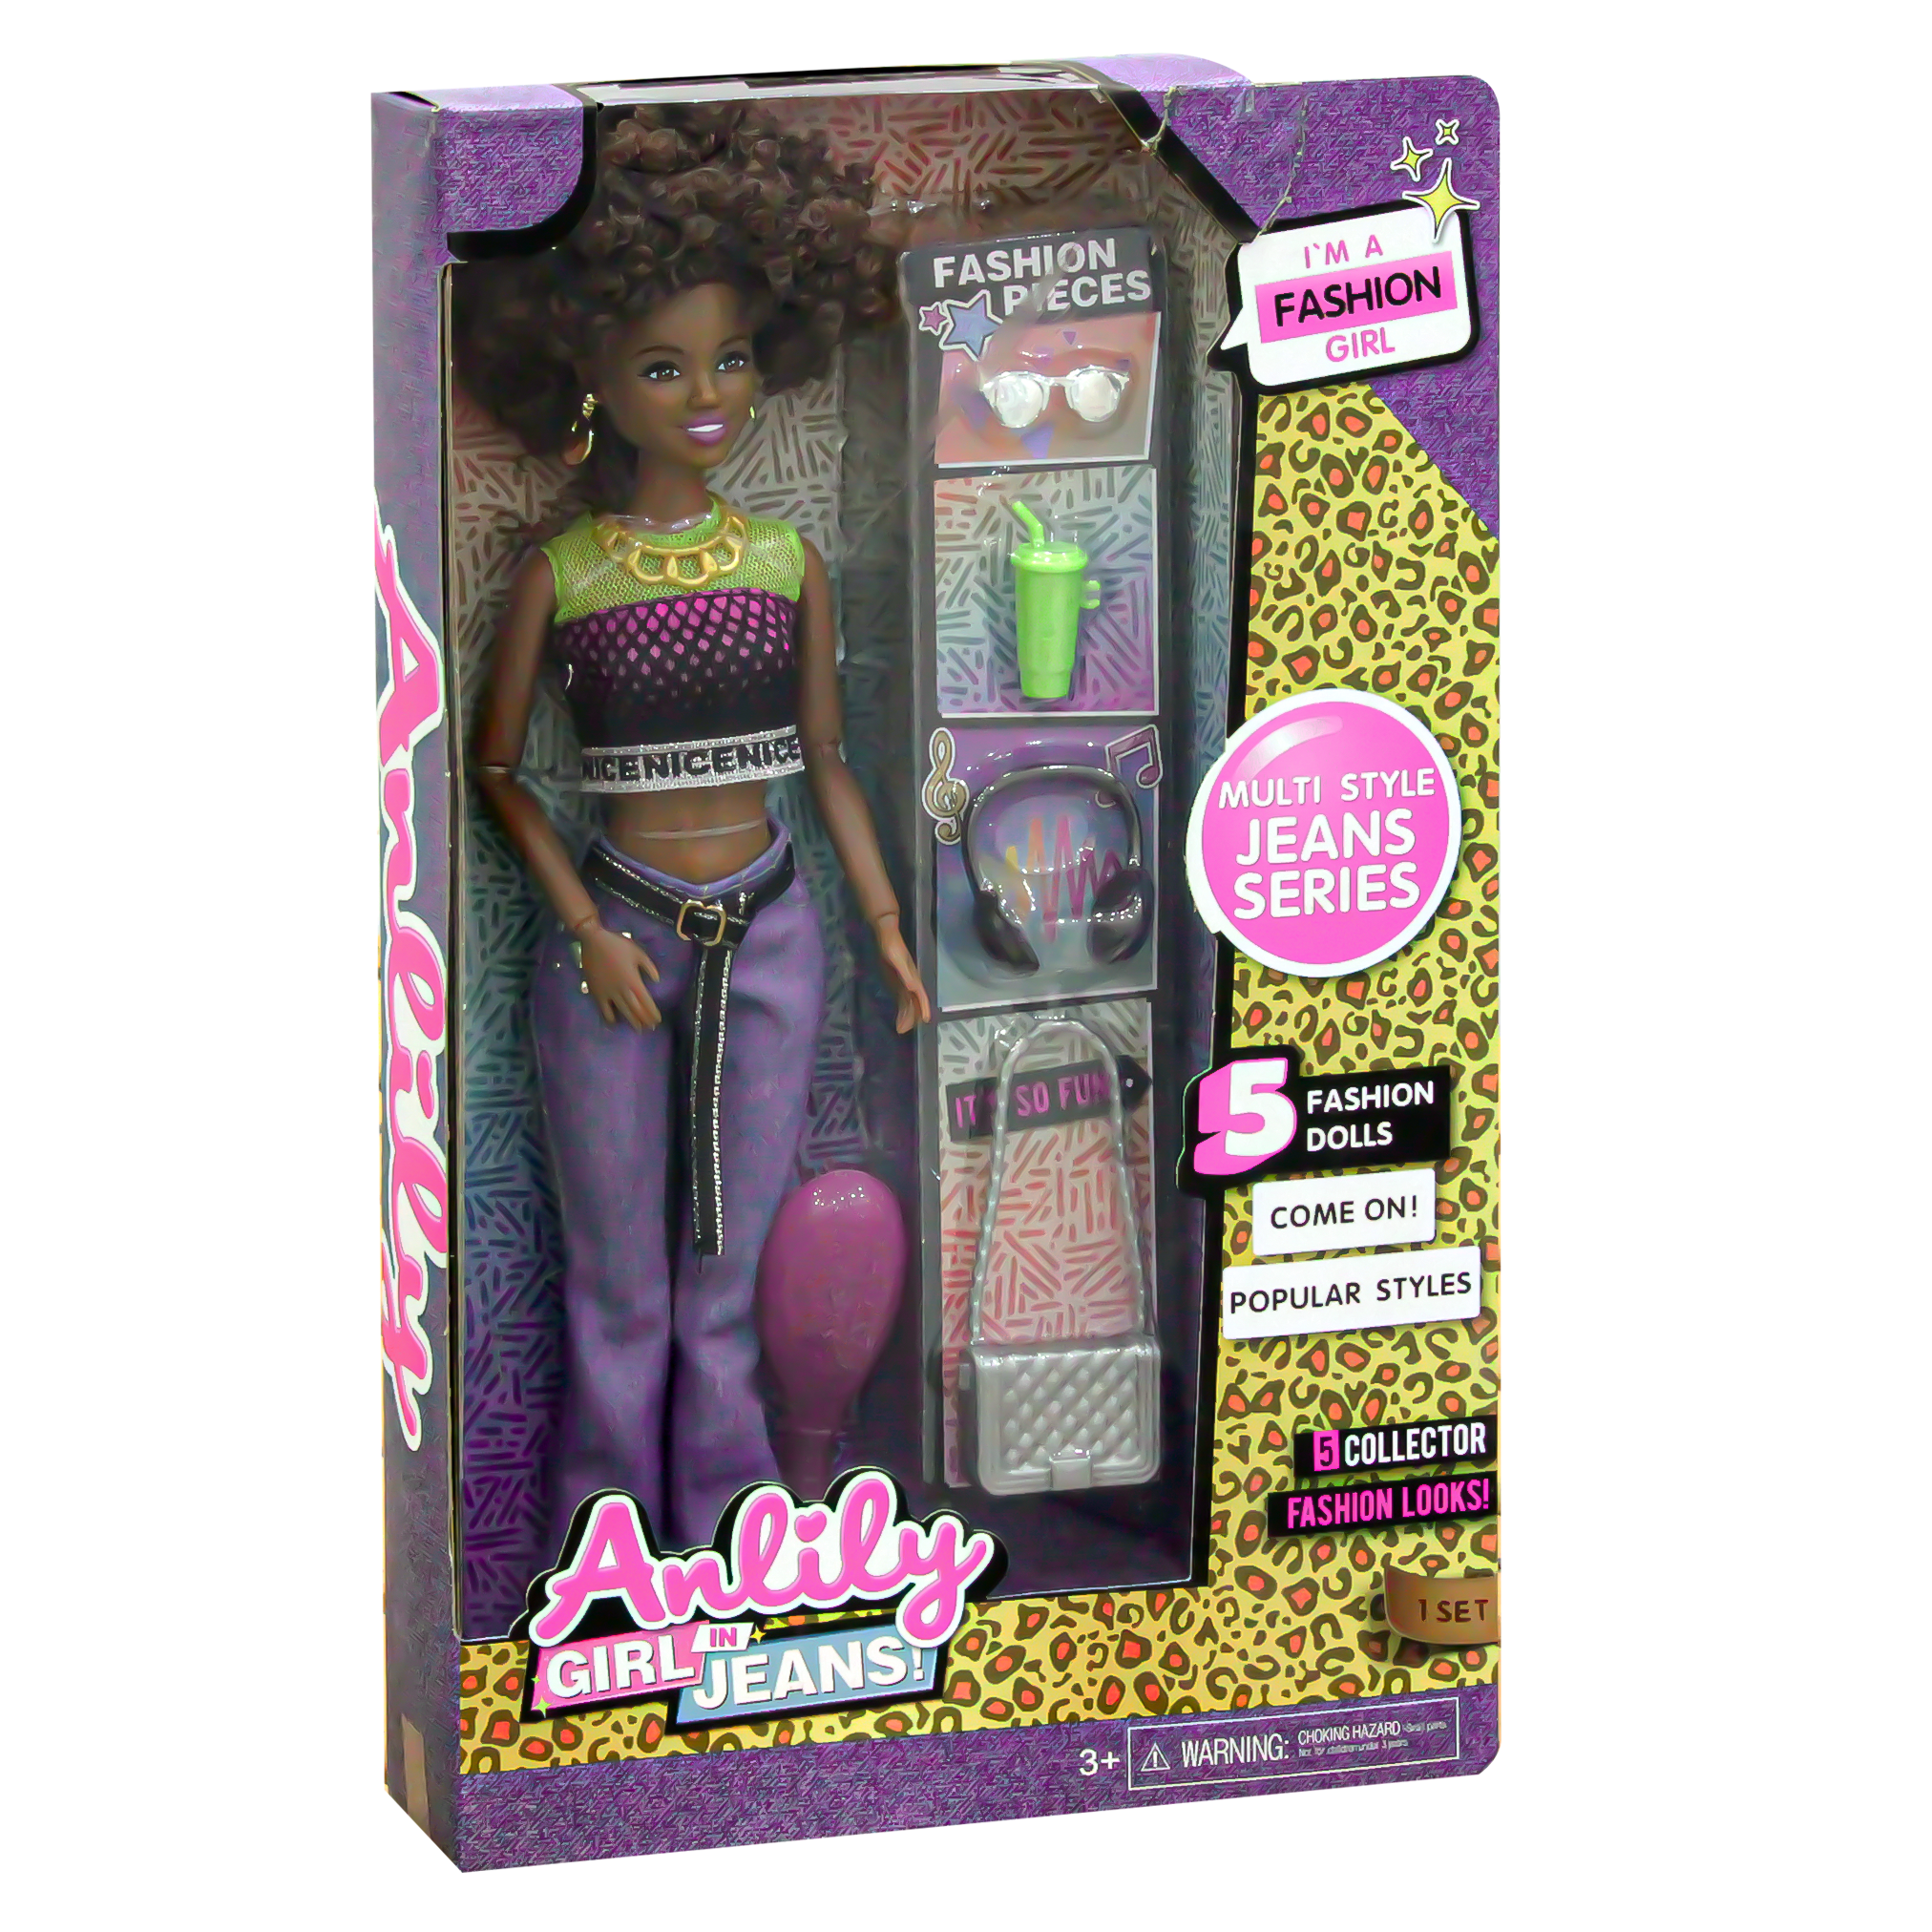 Anlily Fashion Style doll with Pantaloon jeans and Colorful Top with many accessories